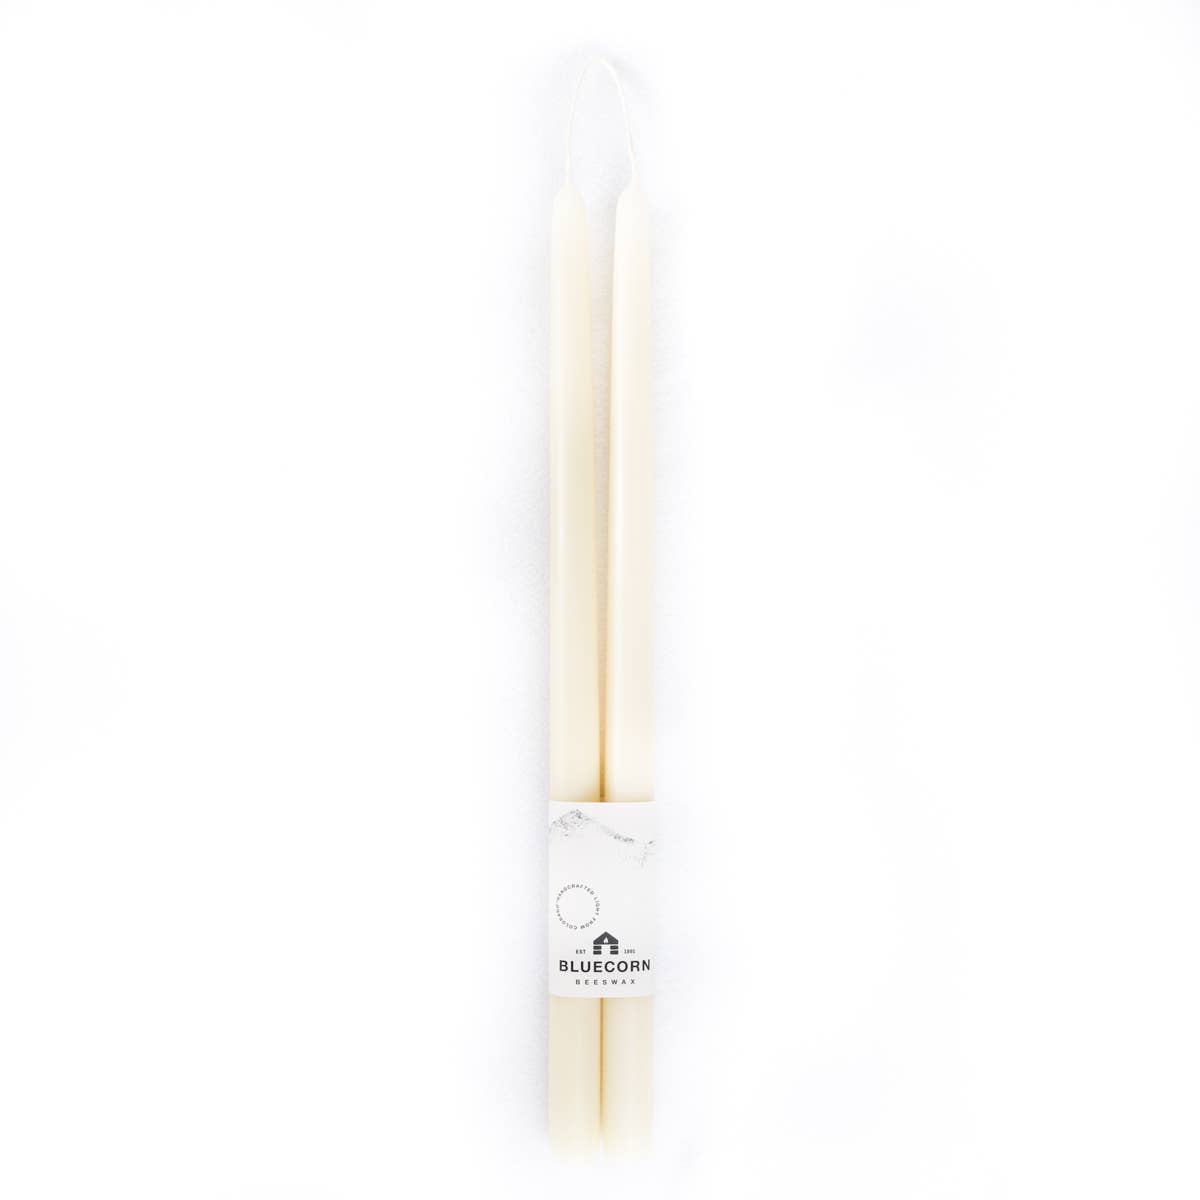 Pair of Hand-Dipped Beeswax Taper Candles: 10" / Black